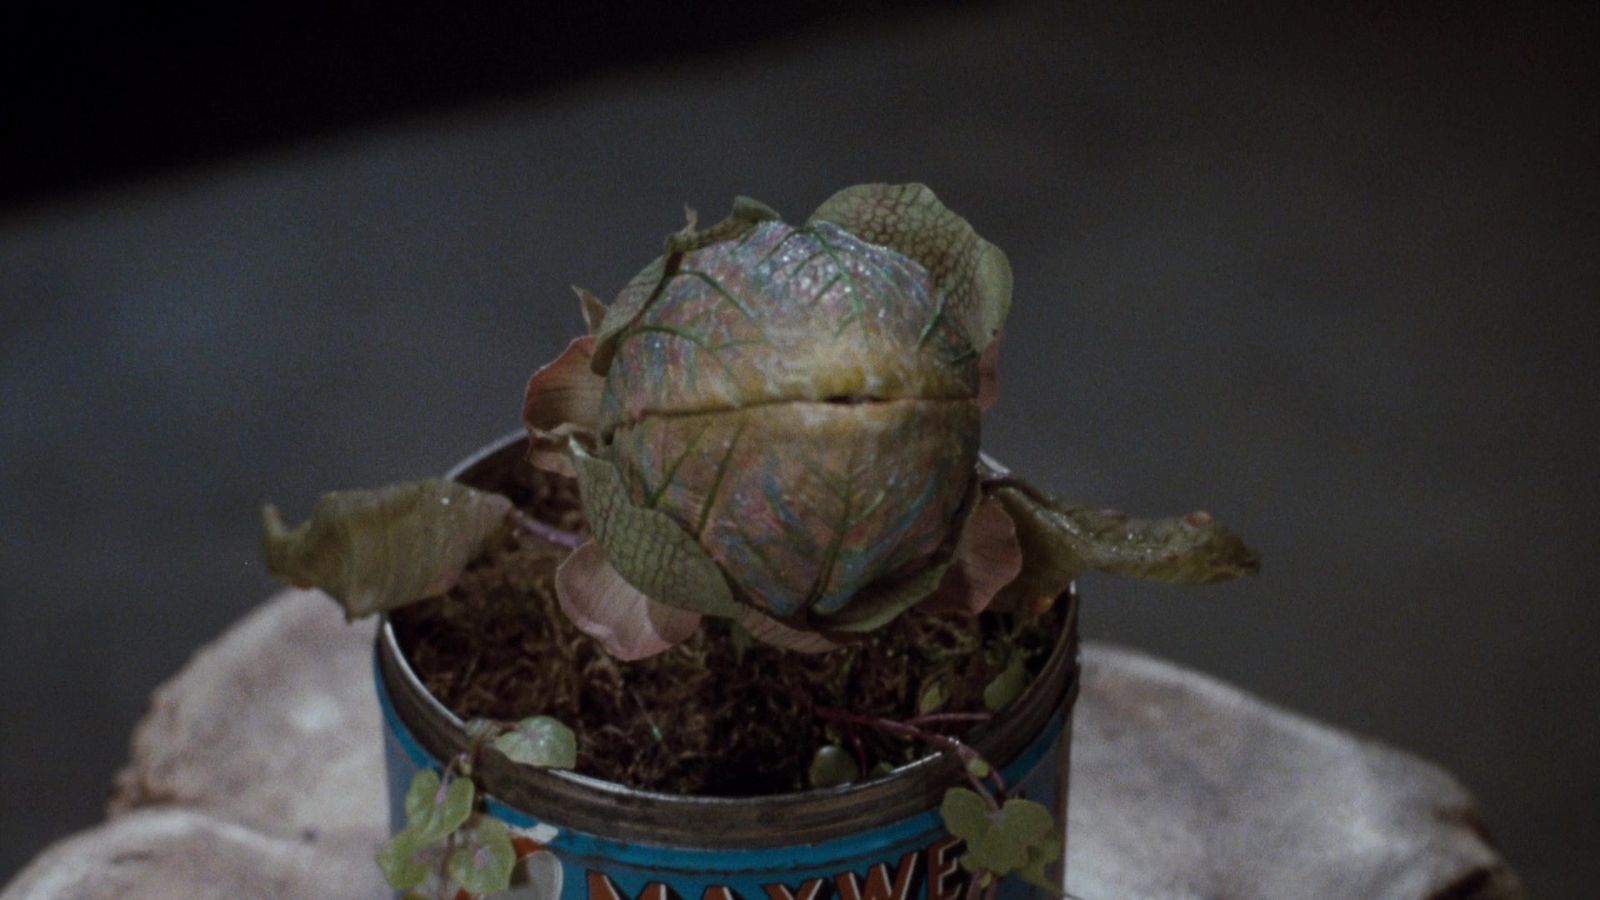 Audrey II, the plant of Little Shop of Horrors from 1960 in their initial form.